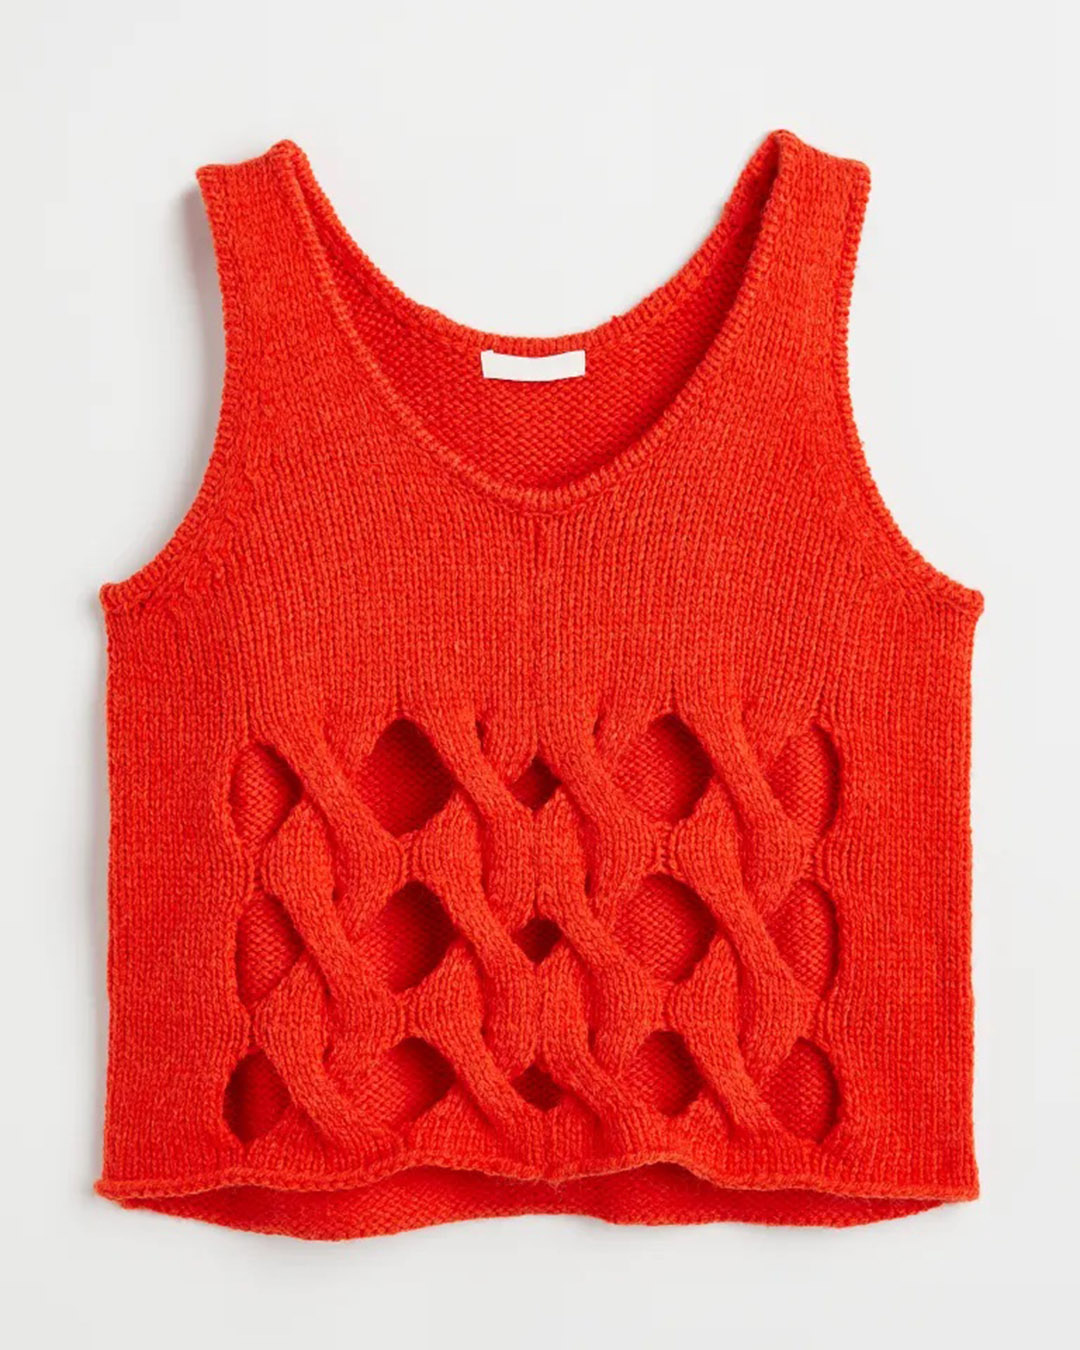 H&M Knitted Vest Top